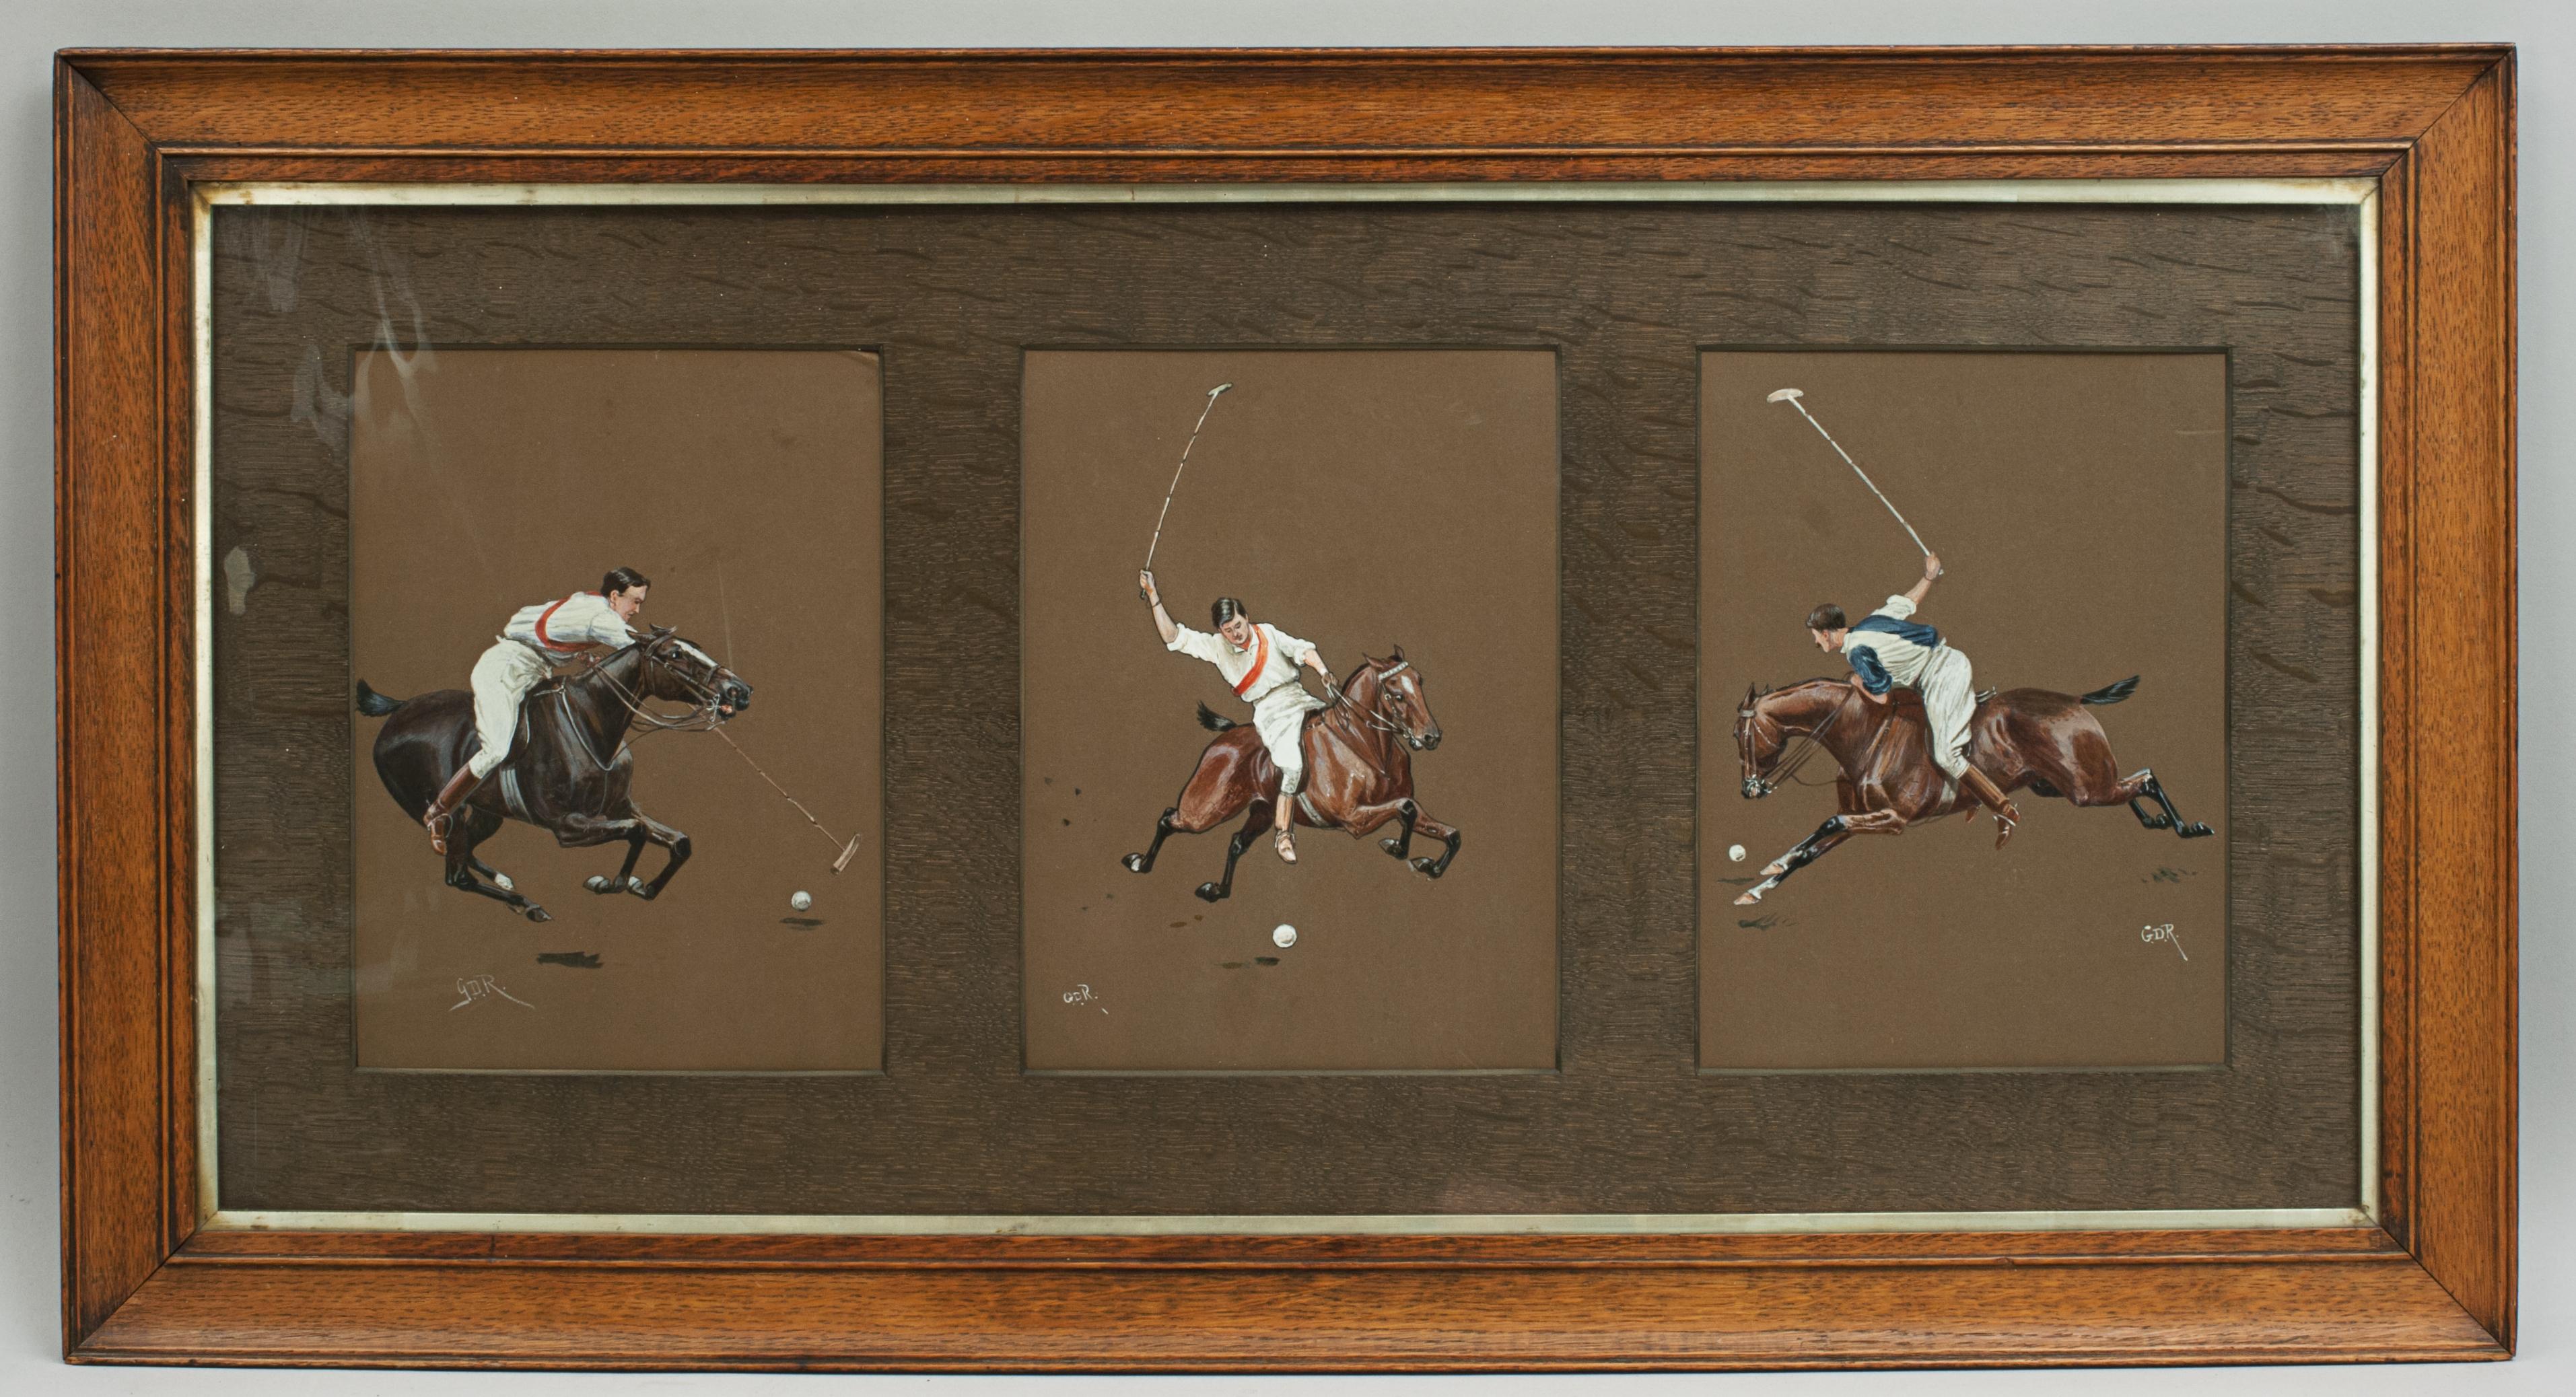 A Polo triptych by George Rowlandson.
A rare set of three original polo watercolours (gouache*), each signed with the initials 'G.D.R.' A single original oak frame with a oak triple aperture mount with original polo art work by George Derville